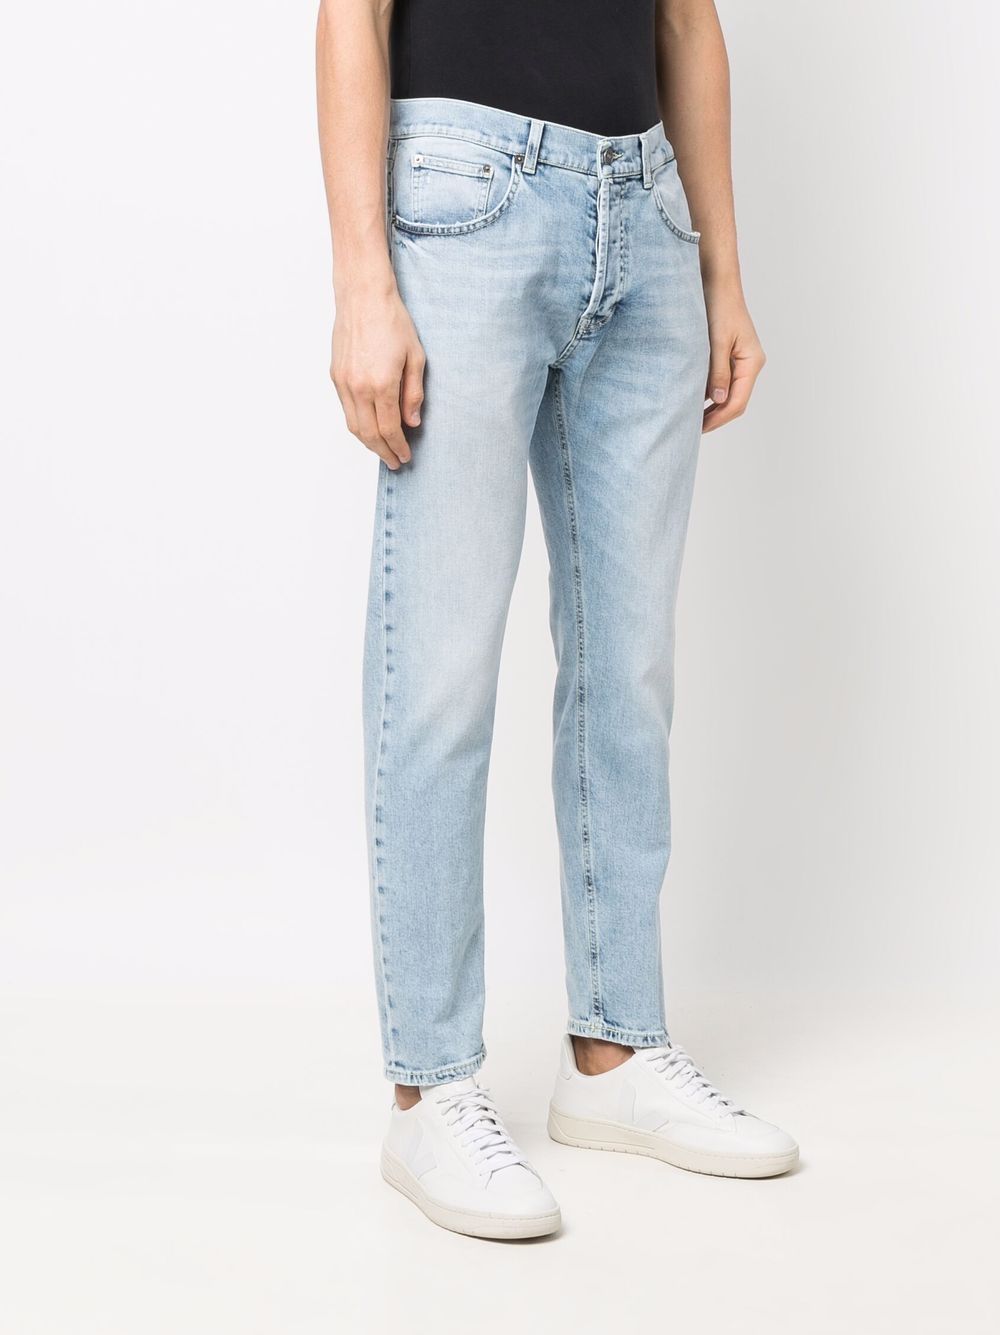 Shop DONDUP tapered light-wash jeans with Express Delivery - FARFETCH